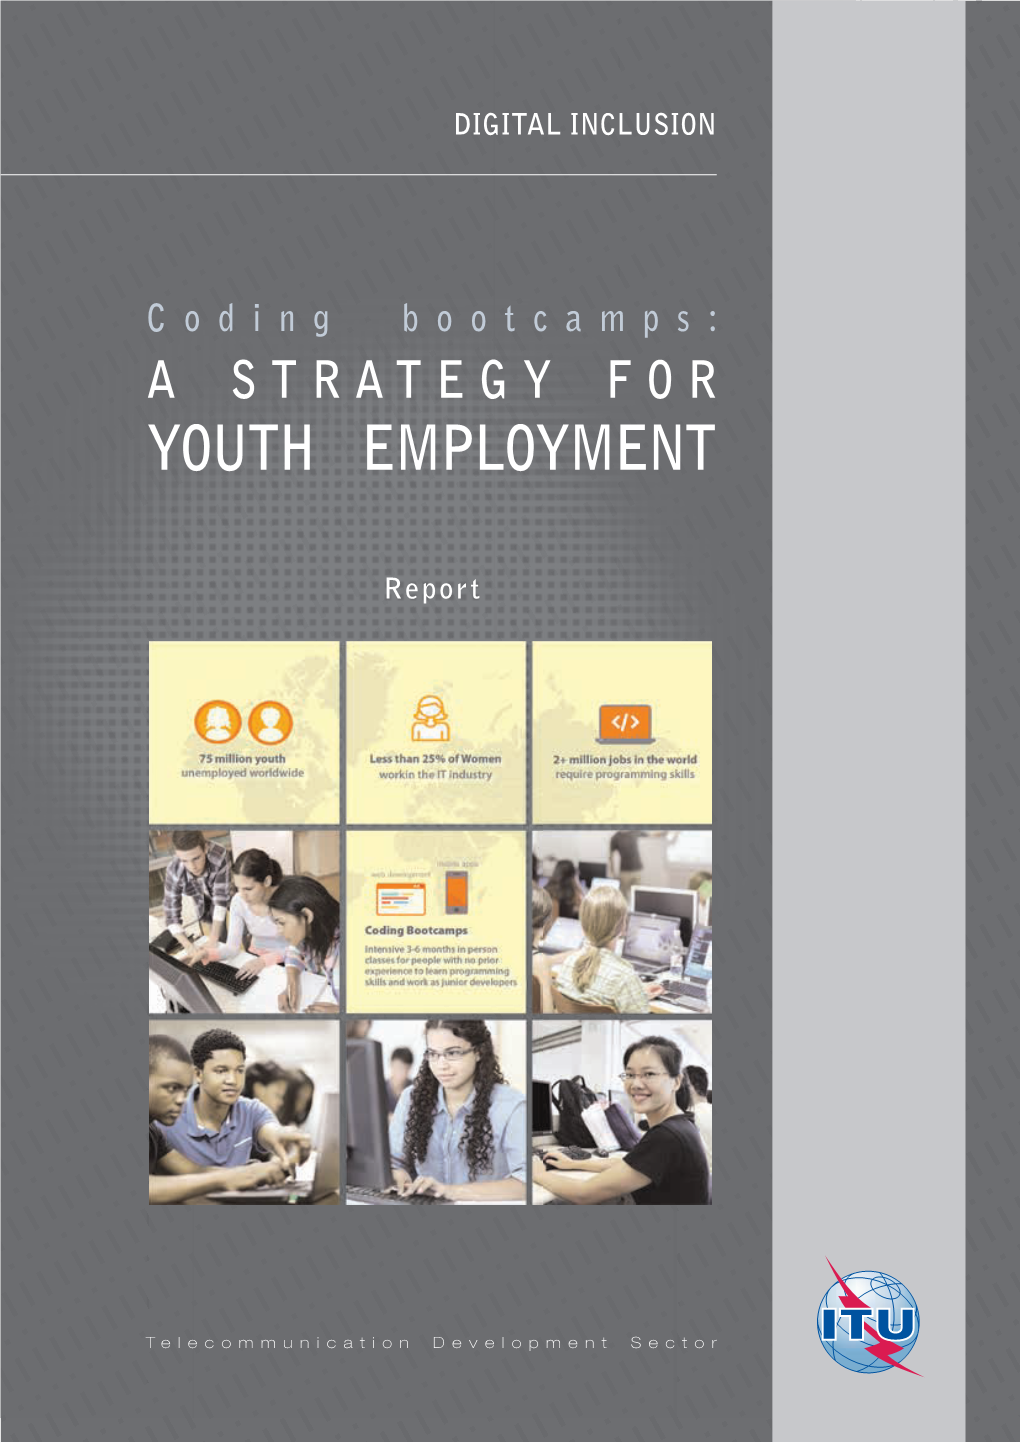 Coding Bootcamps: CH-1211 Geneva 20 Switzerland a STRATEGY for YOUTH EMPLOYMENT